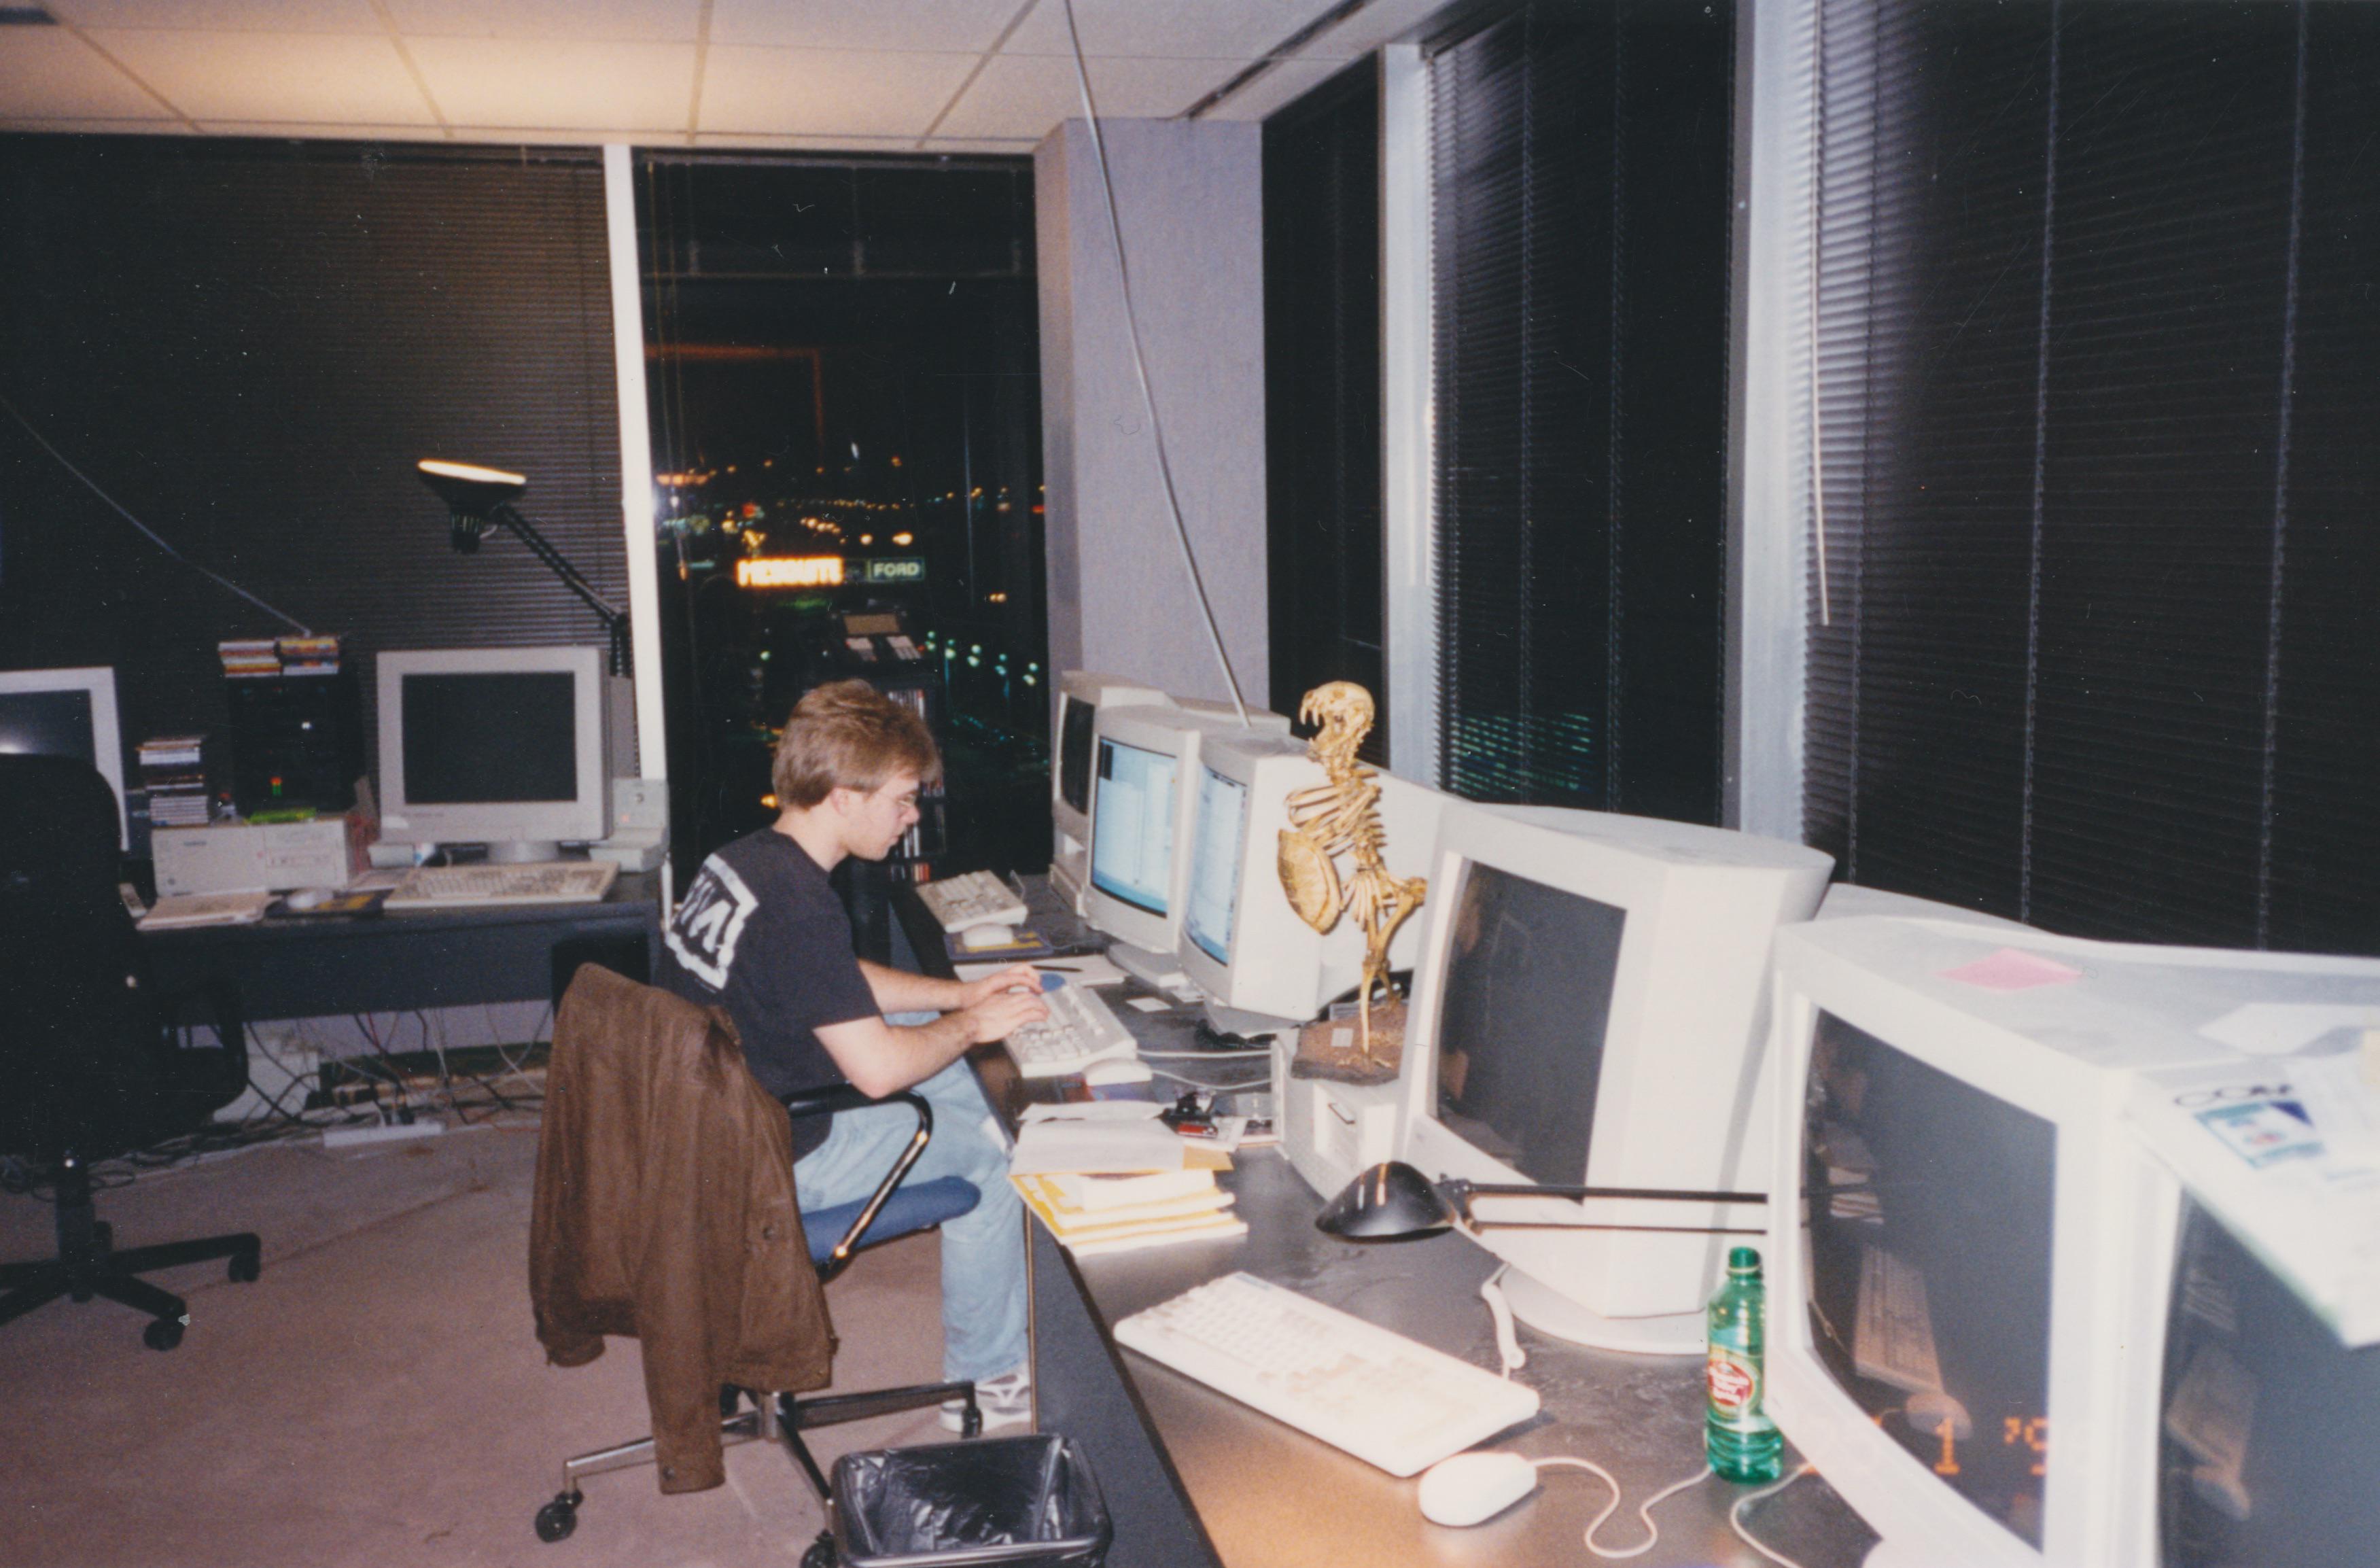 John_Romero_-_Making_Quake._Another_view_showing_%40ID_AA_Carmack_working_on_the_game.The_previous_photo_looked_at_his_monitors._%28CGmgSQmUQAAYMWh%29.jpg